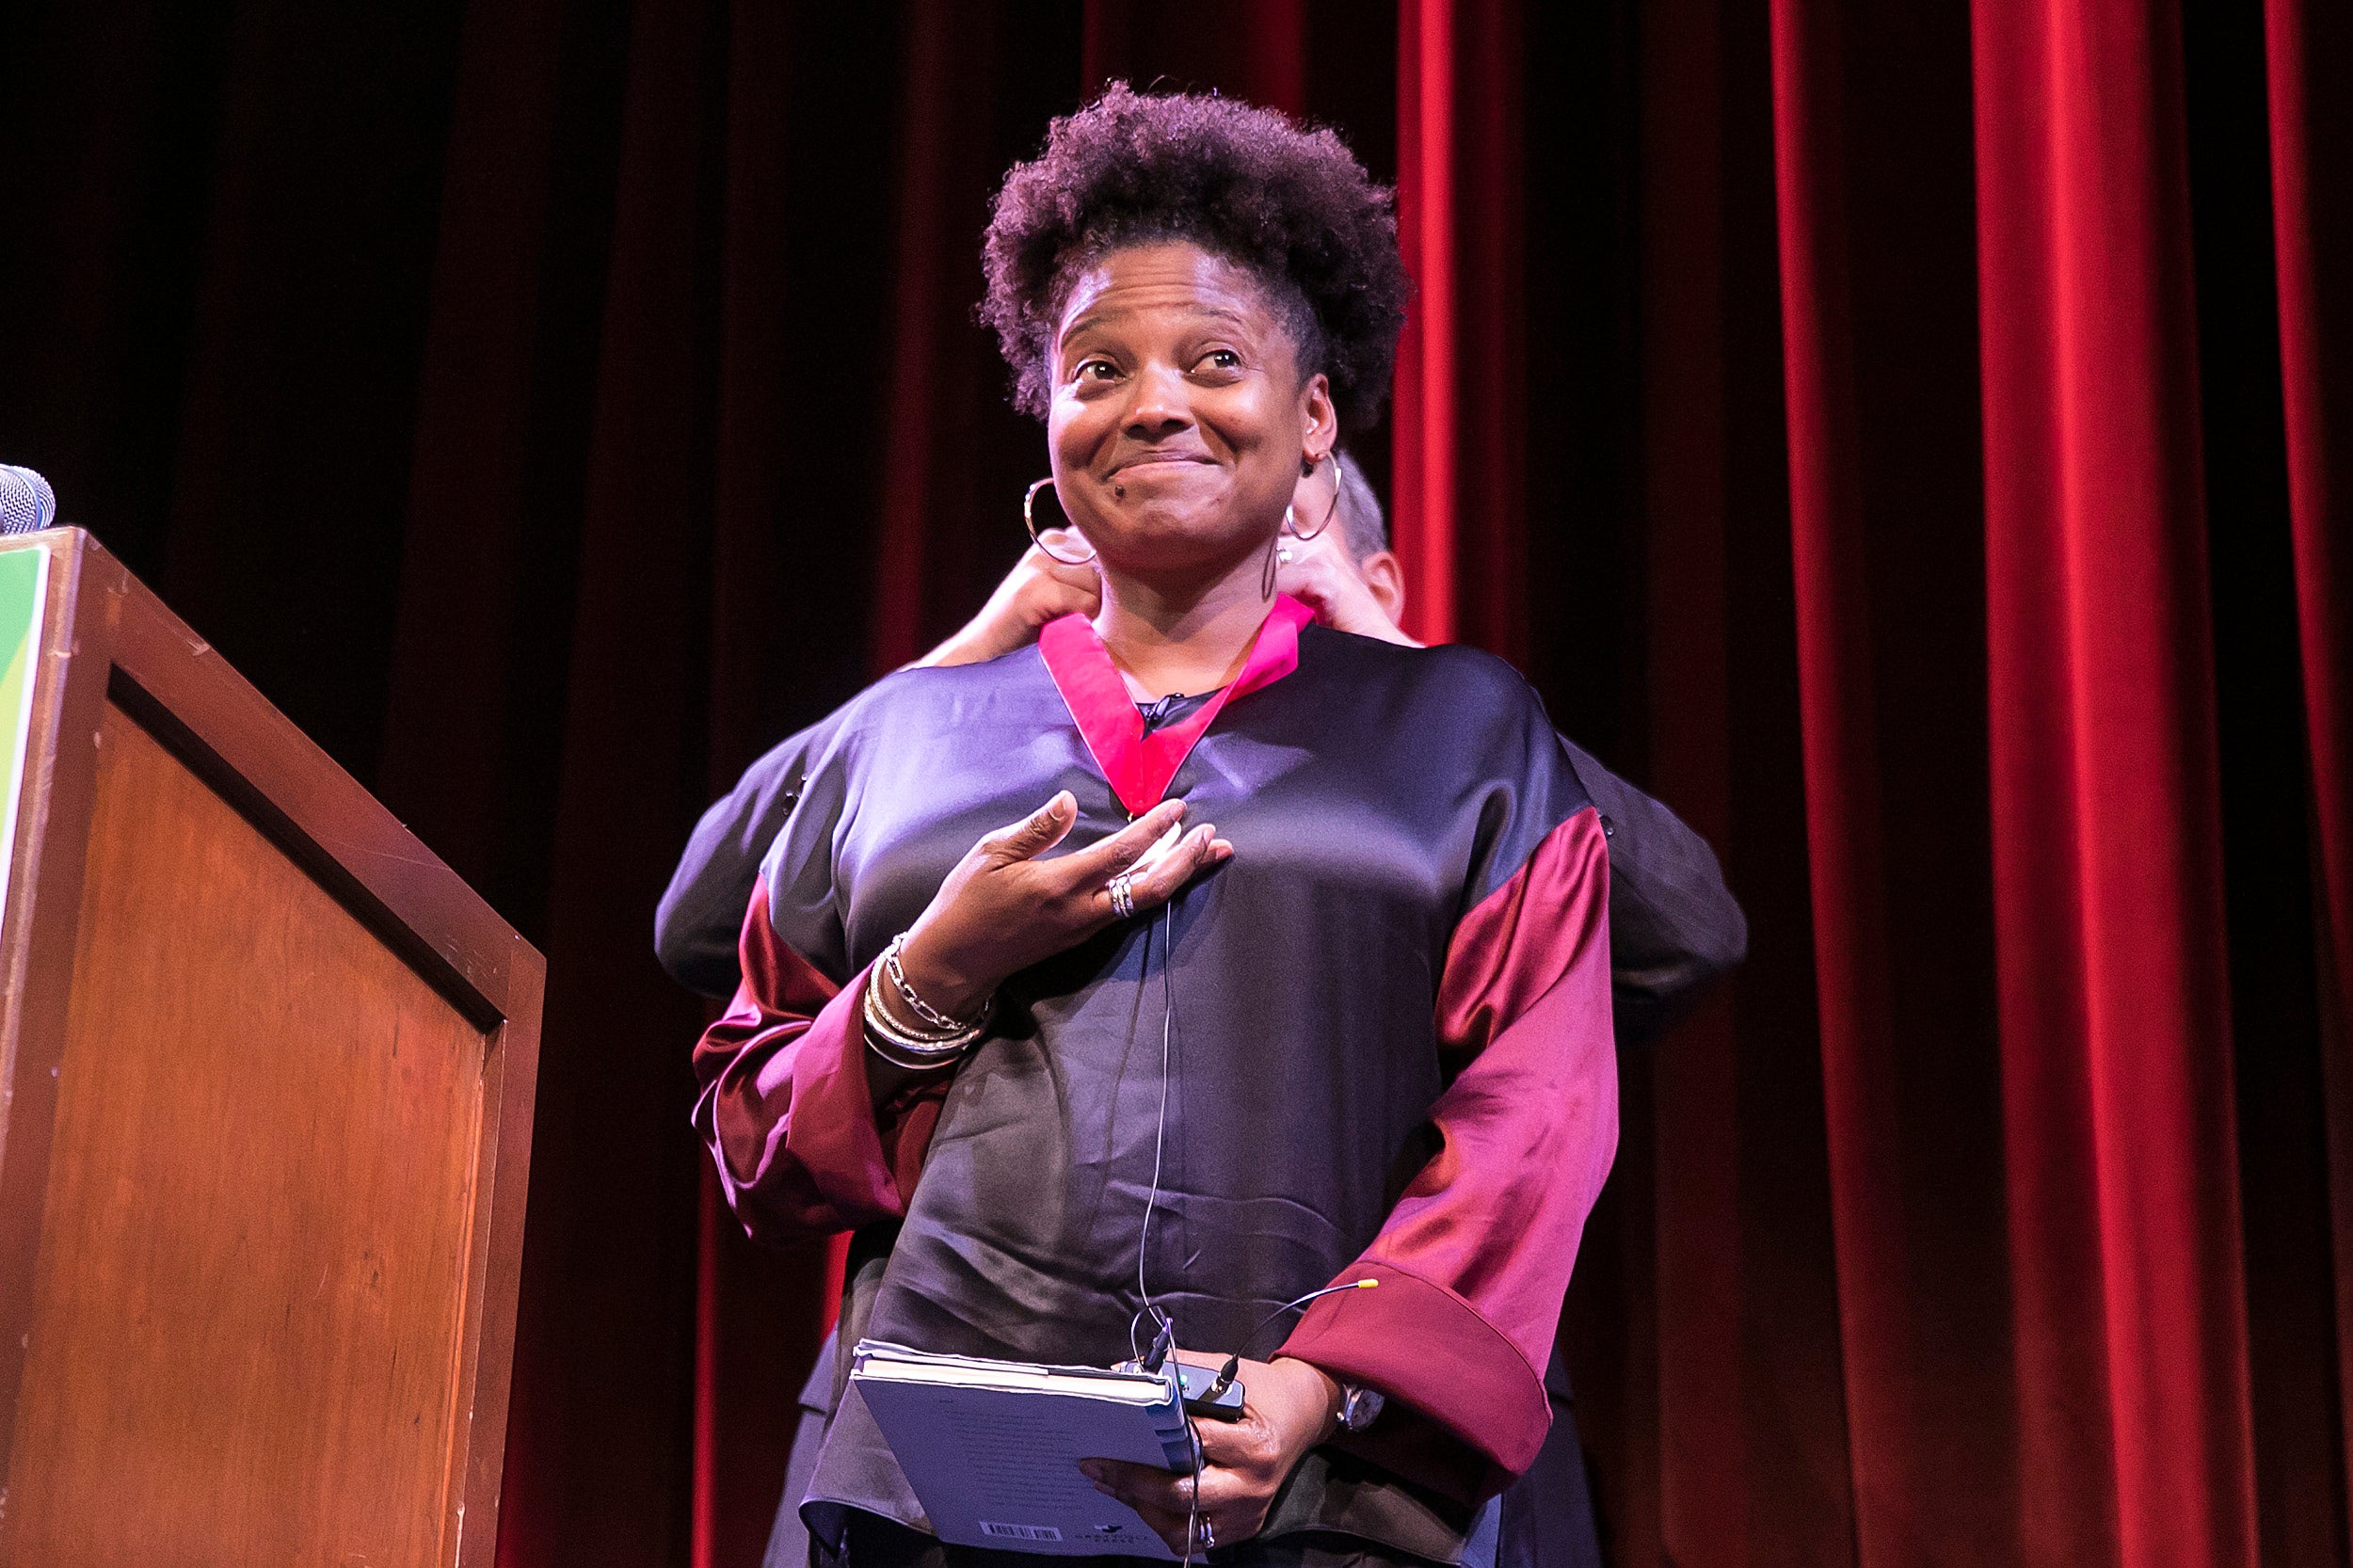 Tracy K. Smith is awarded the Harvard Arts Medal by Larry Bacow